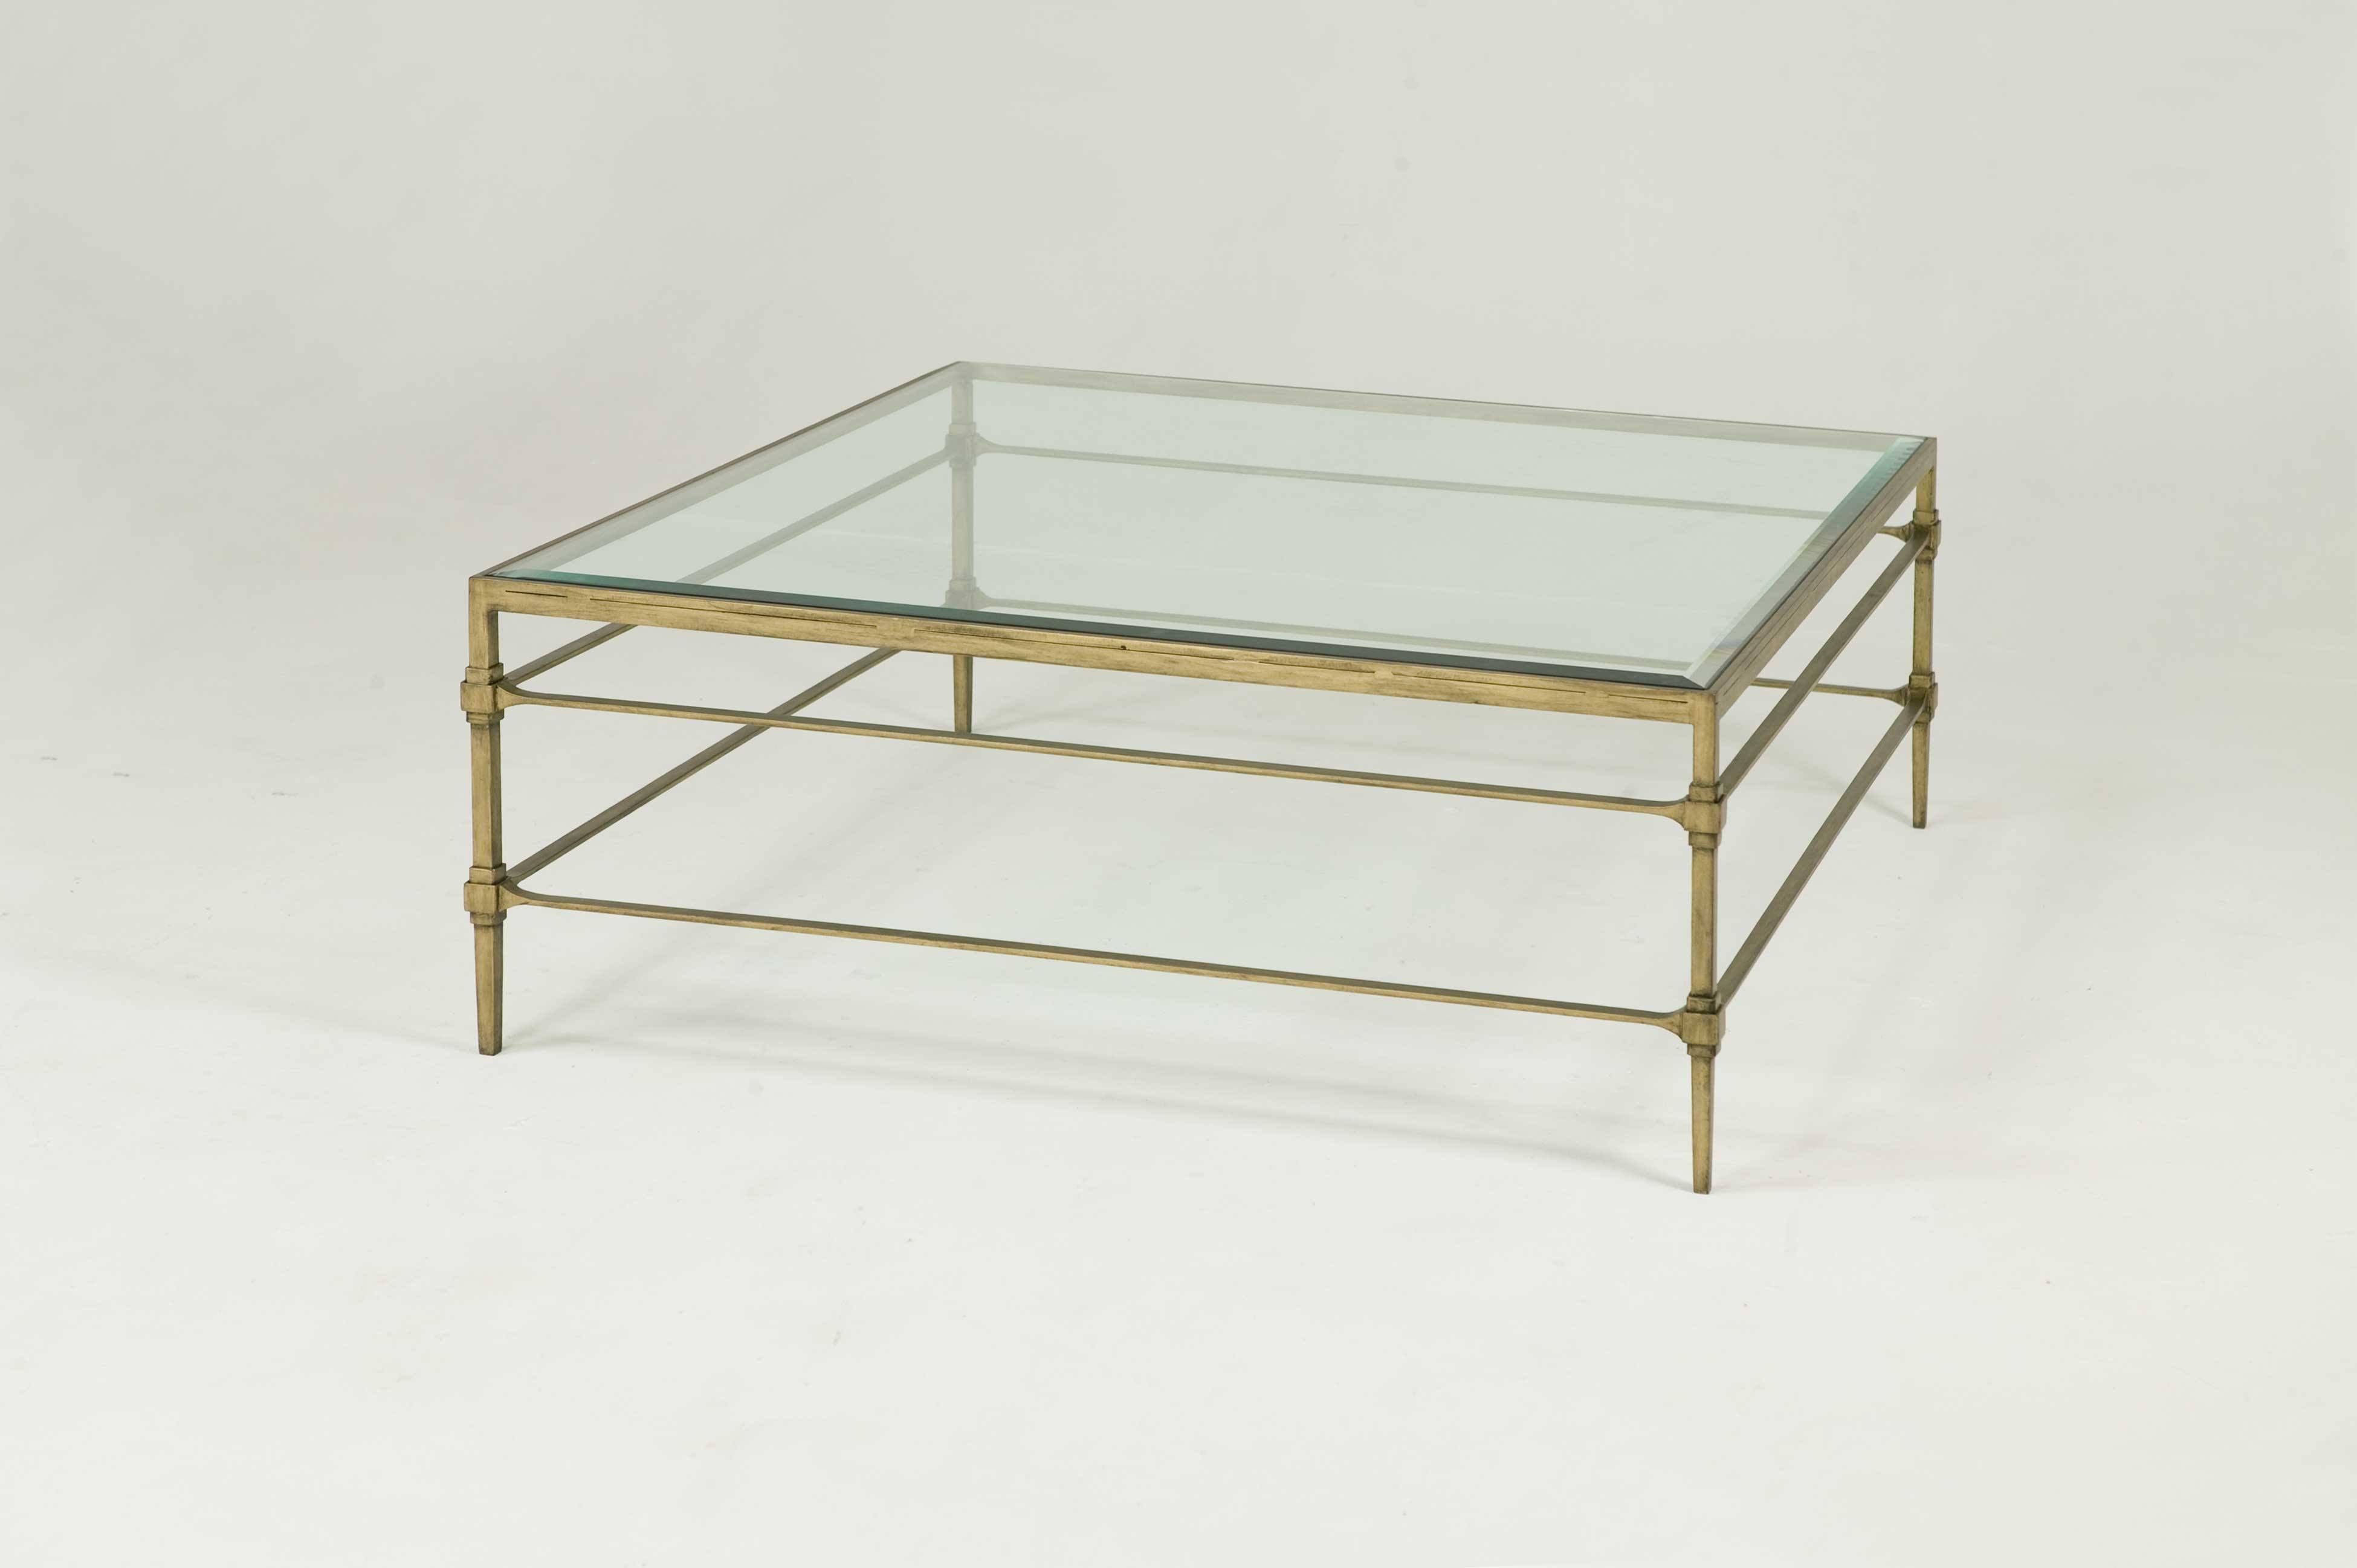 Coffee Table: Astounding Rectangular Glass Coffee Table With Shelf Inside Metal And Glass Coffee Tables (View 9 of 30)